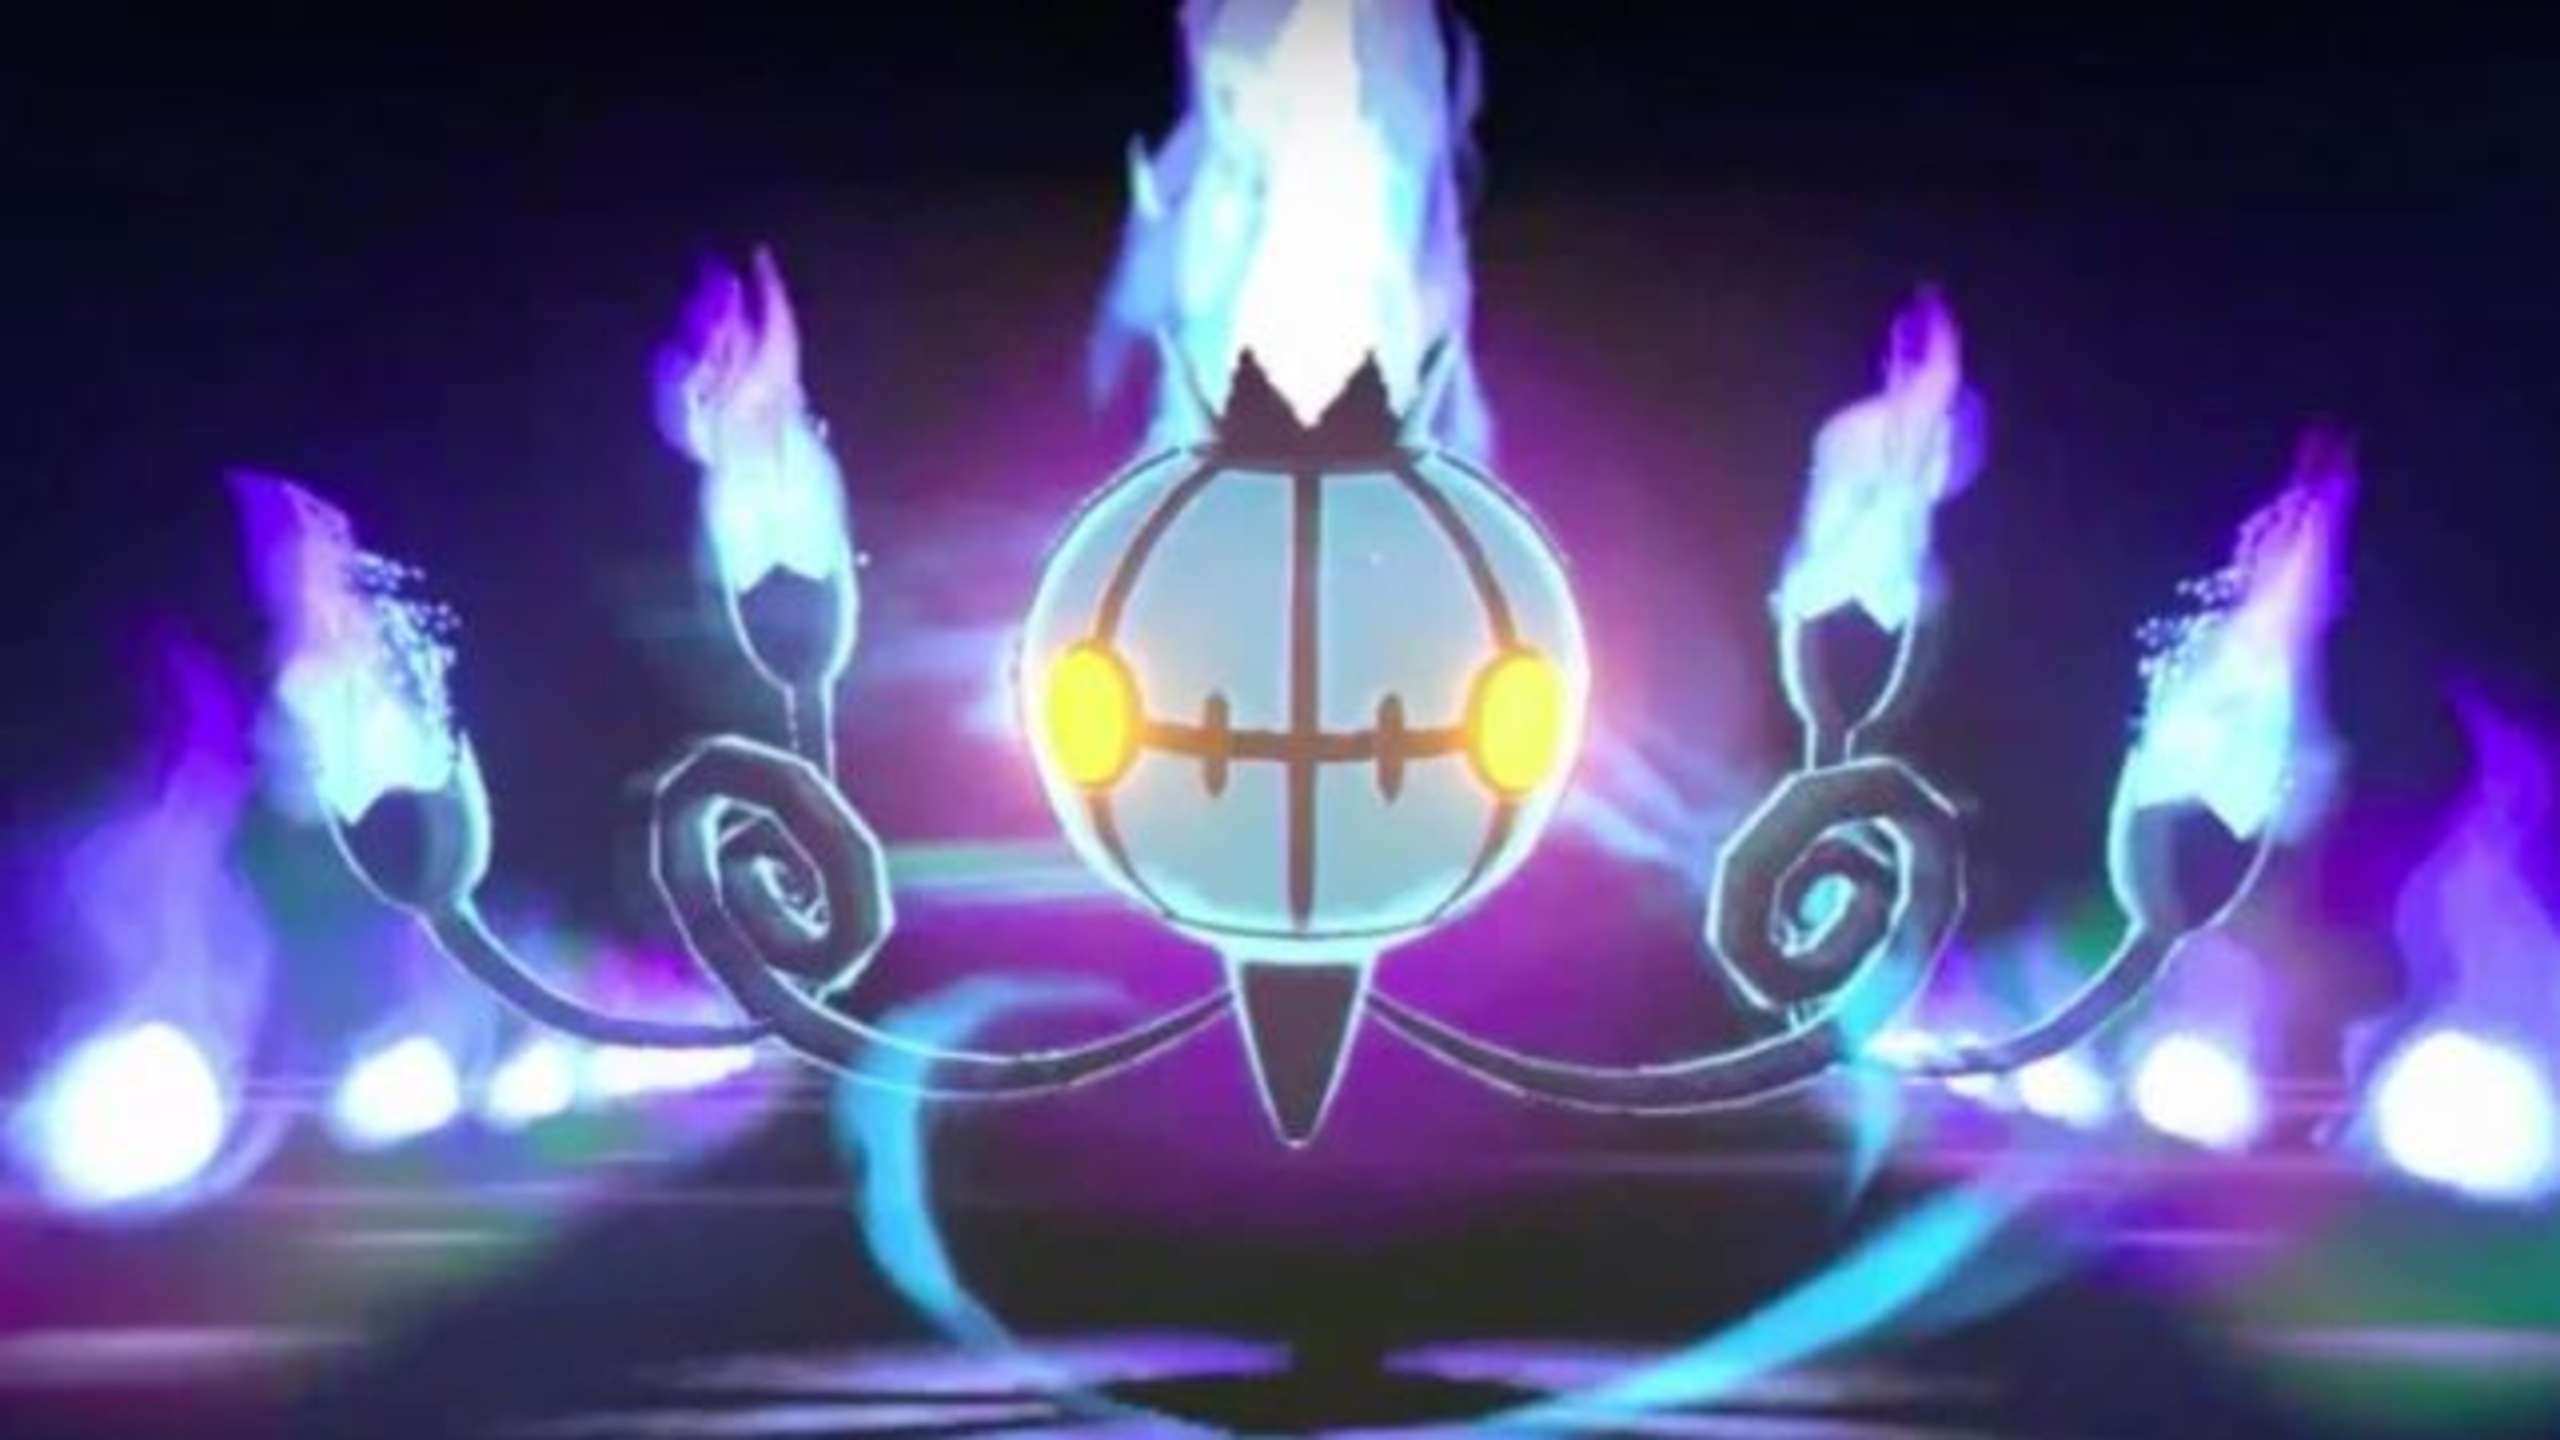 A Devoted Pokemon Enthusiast Has Carved An Incredible Likeness Of Chandelure, A Ghost/Fire-Type Pocket Monster, Into A Pumpkin In Time For Halloween